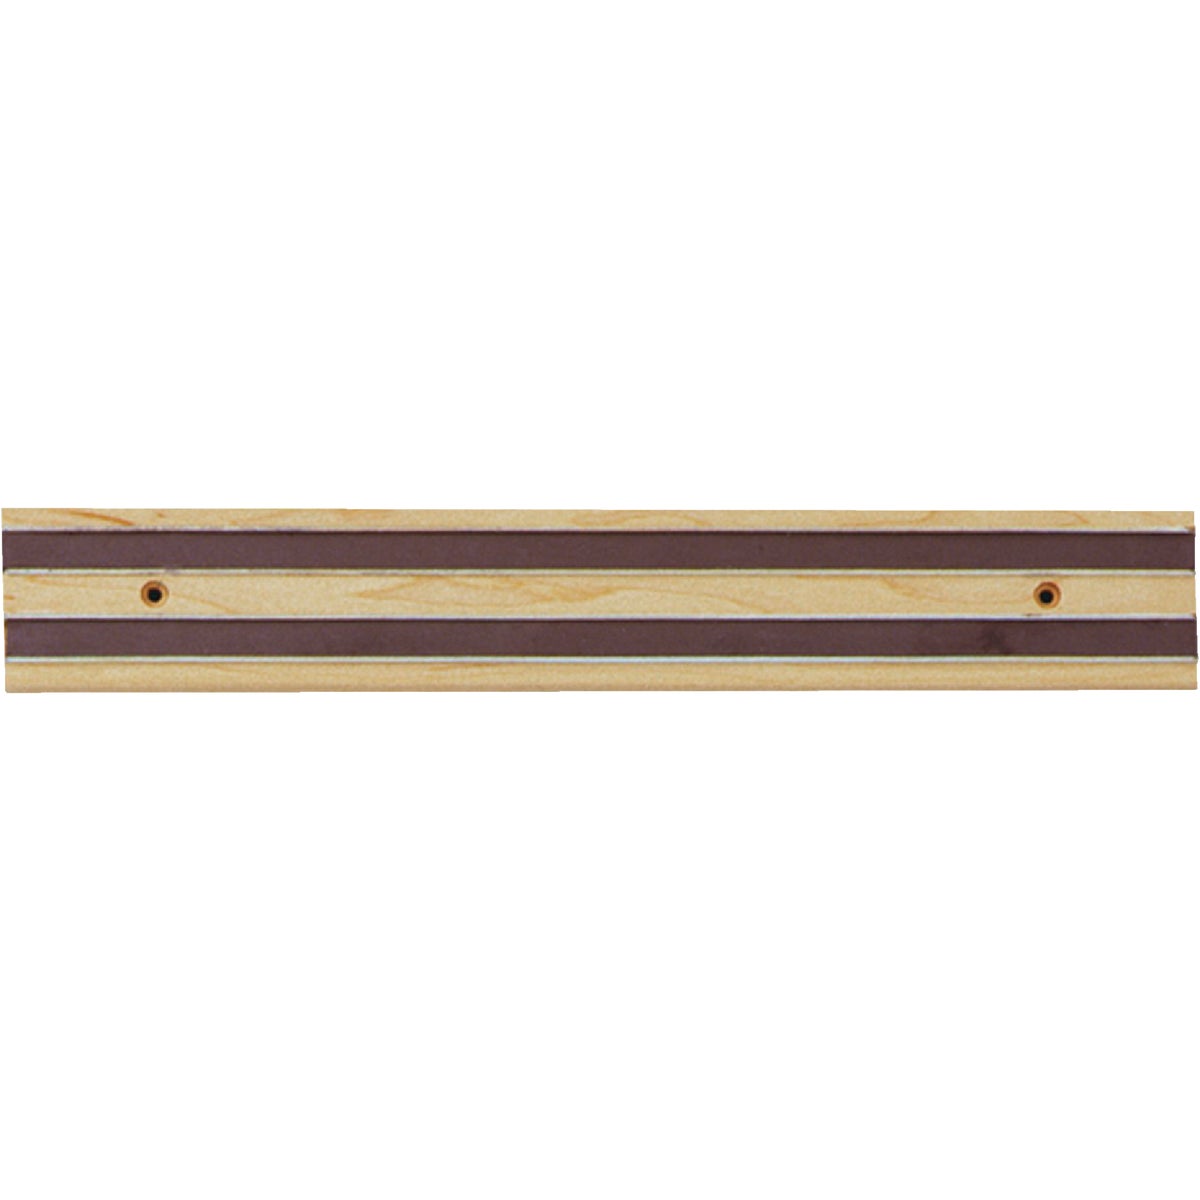 Item 612055, Made of hardwood with 2 magnet strips to ensure safe storage of cutlery.